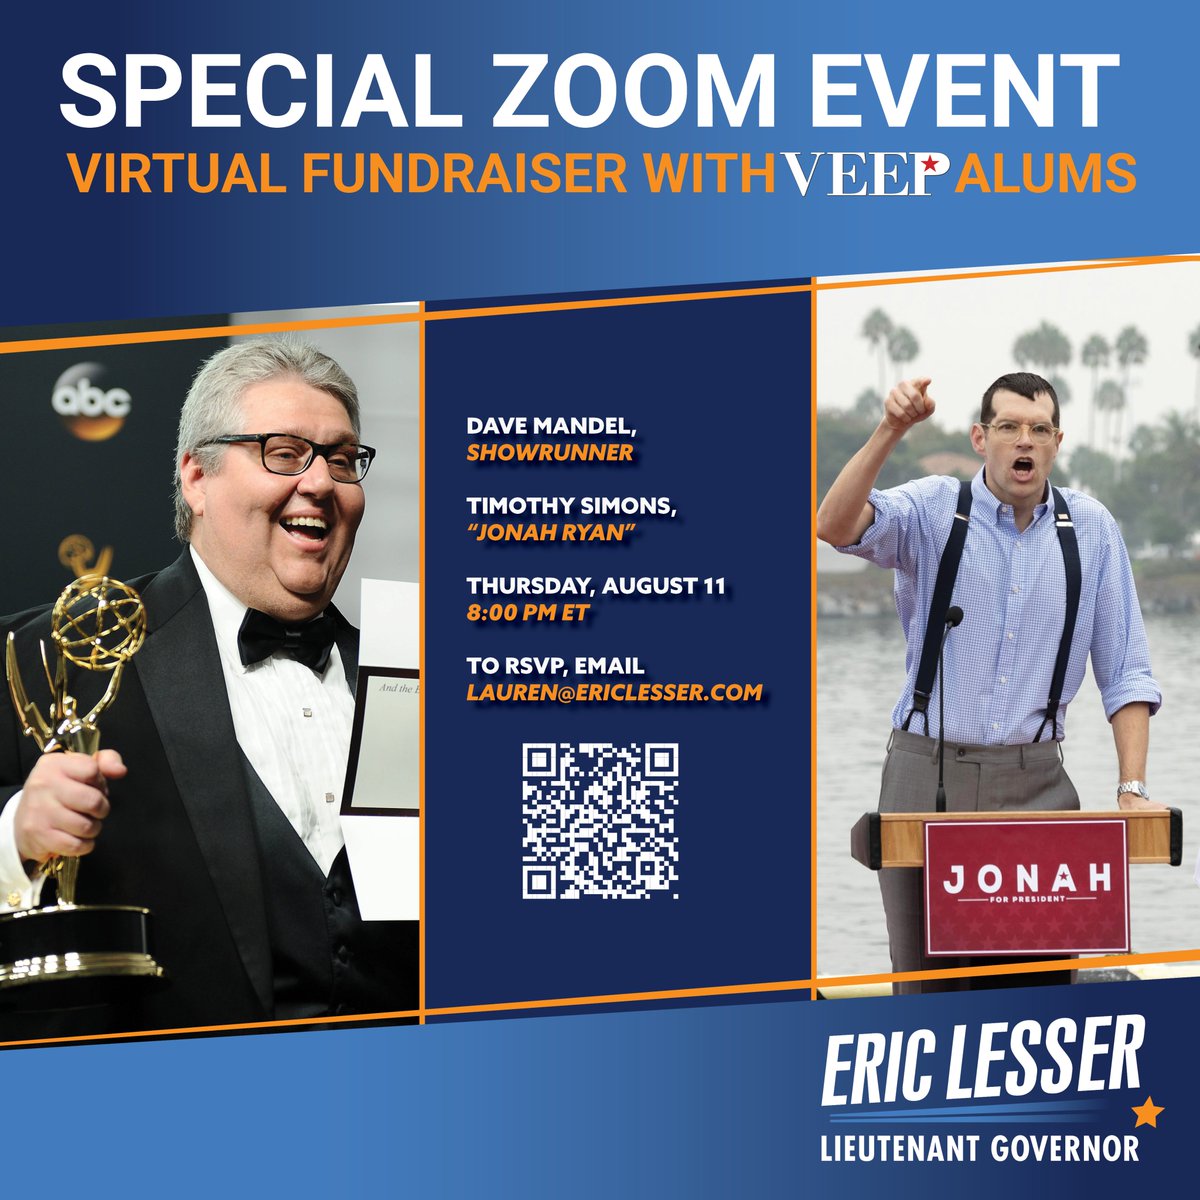 Hey @VeepHBO fans, @timothycsimons & I will be hosting a zoom #fundraiser for our old #veepconsultant @EricLesser as he runs for #Veep of Massachusetts. I mean #LieutenantGovernor. Aug. 11 at 8 pm ET: secure.actblue.com/donate/eric-le… Join us & learn how to make the perfect #JonahInsult...